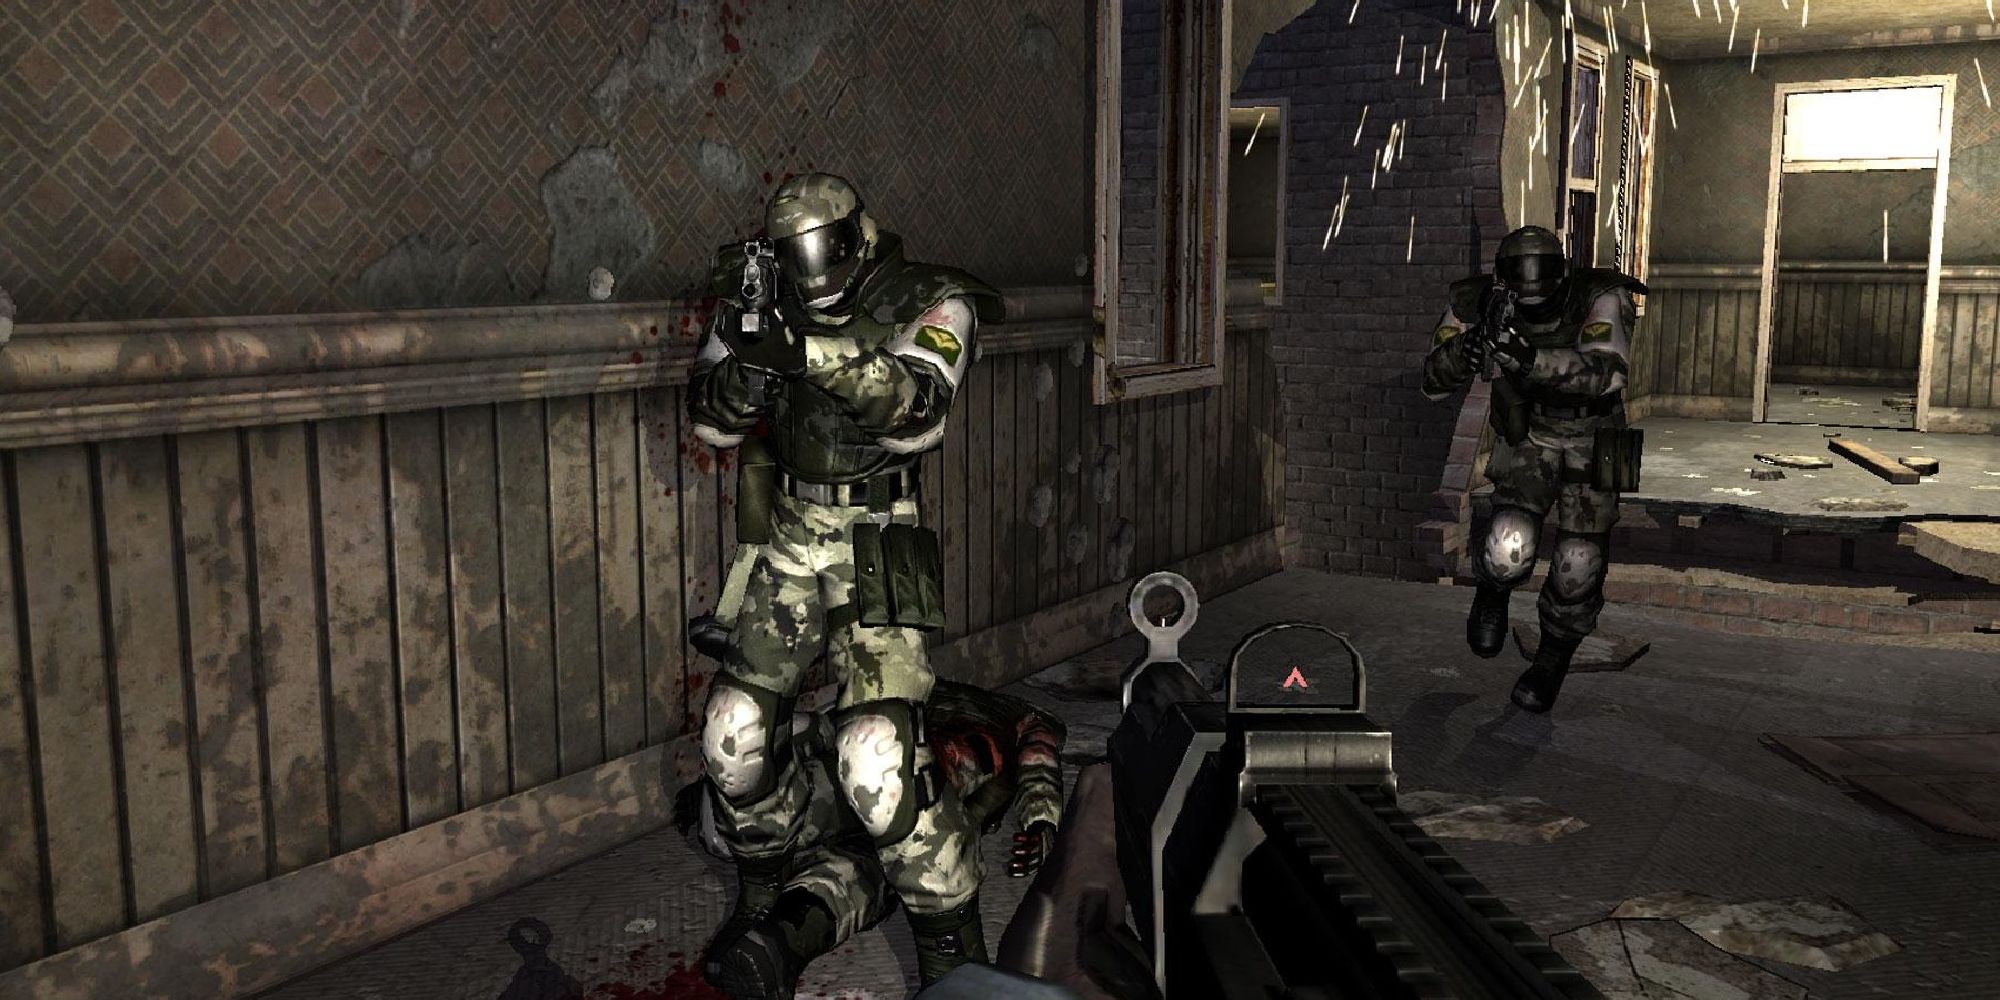 Screenshot of the proganosut levelling his gun at enemies from a first-person perspective in a run-down building. 